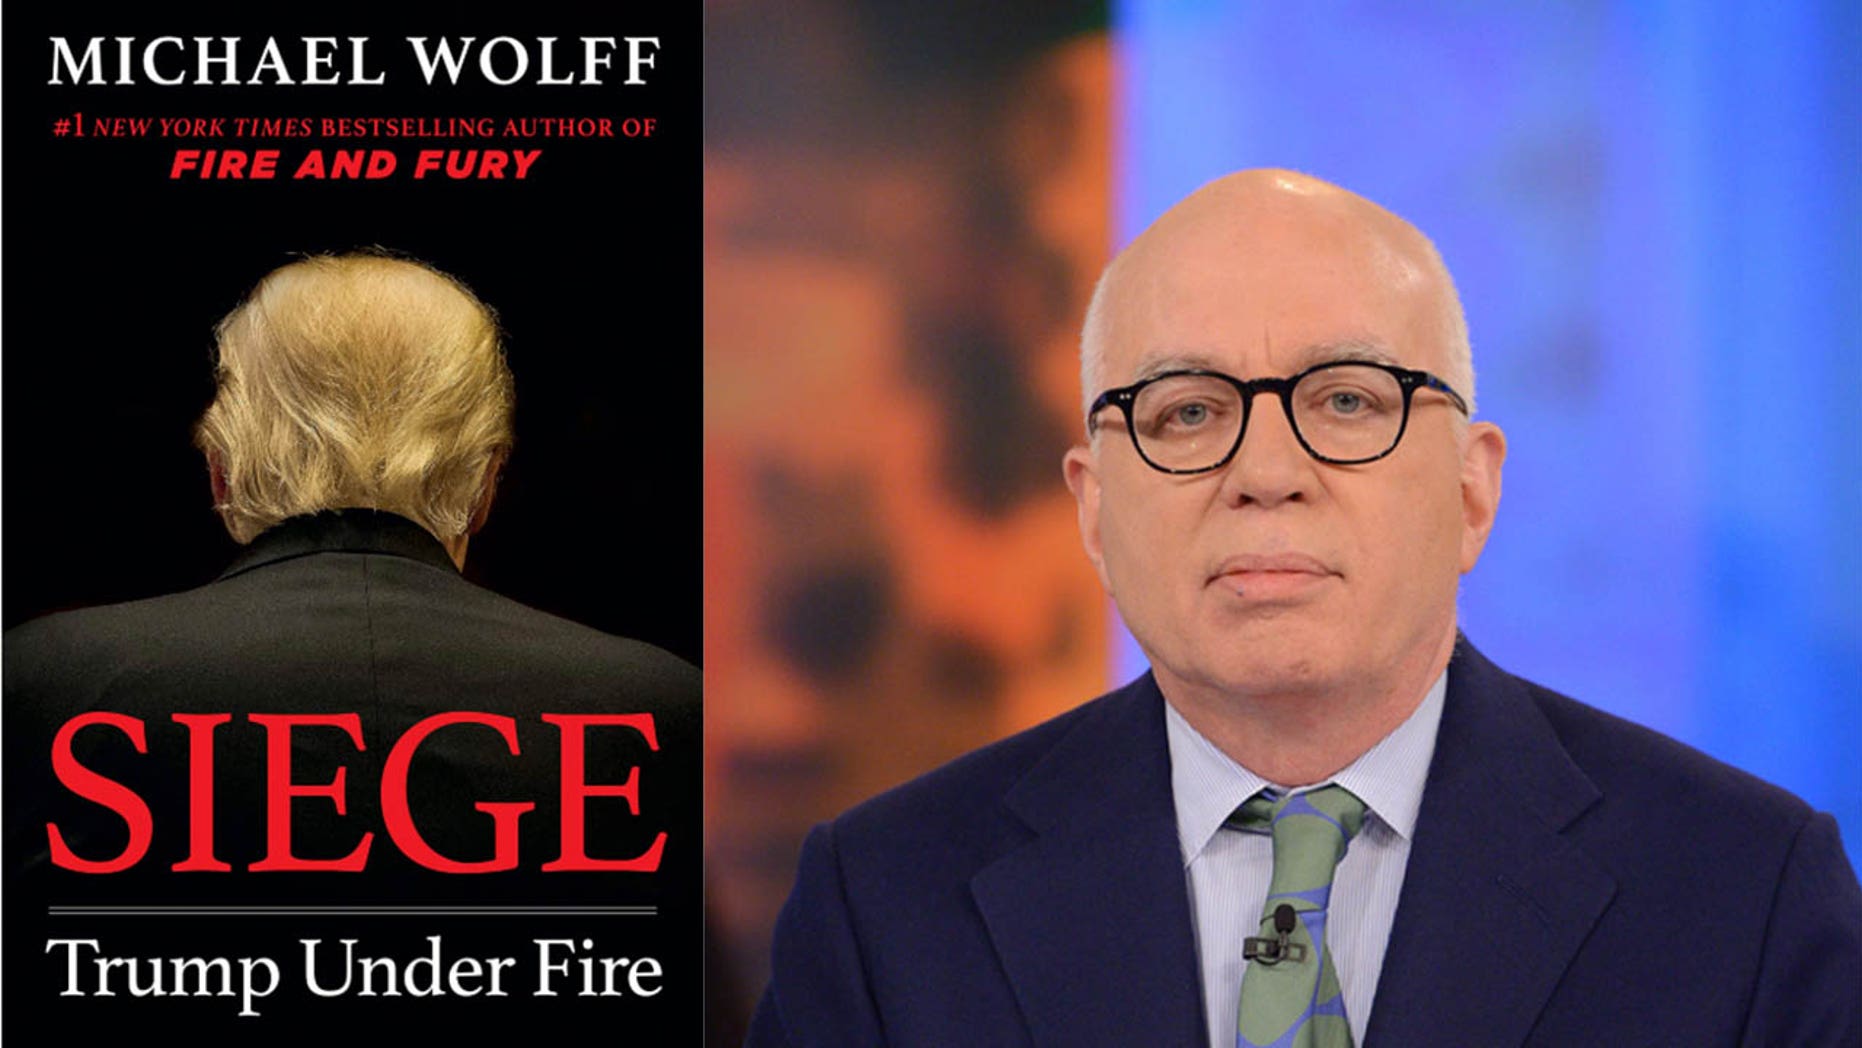 Controversial author Michael Wolff’s “Siege: Trump Under Fire” is already under fire itself.